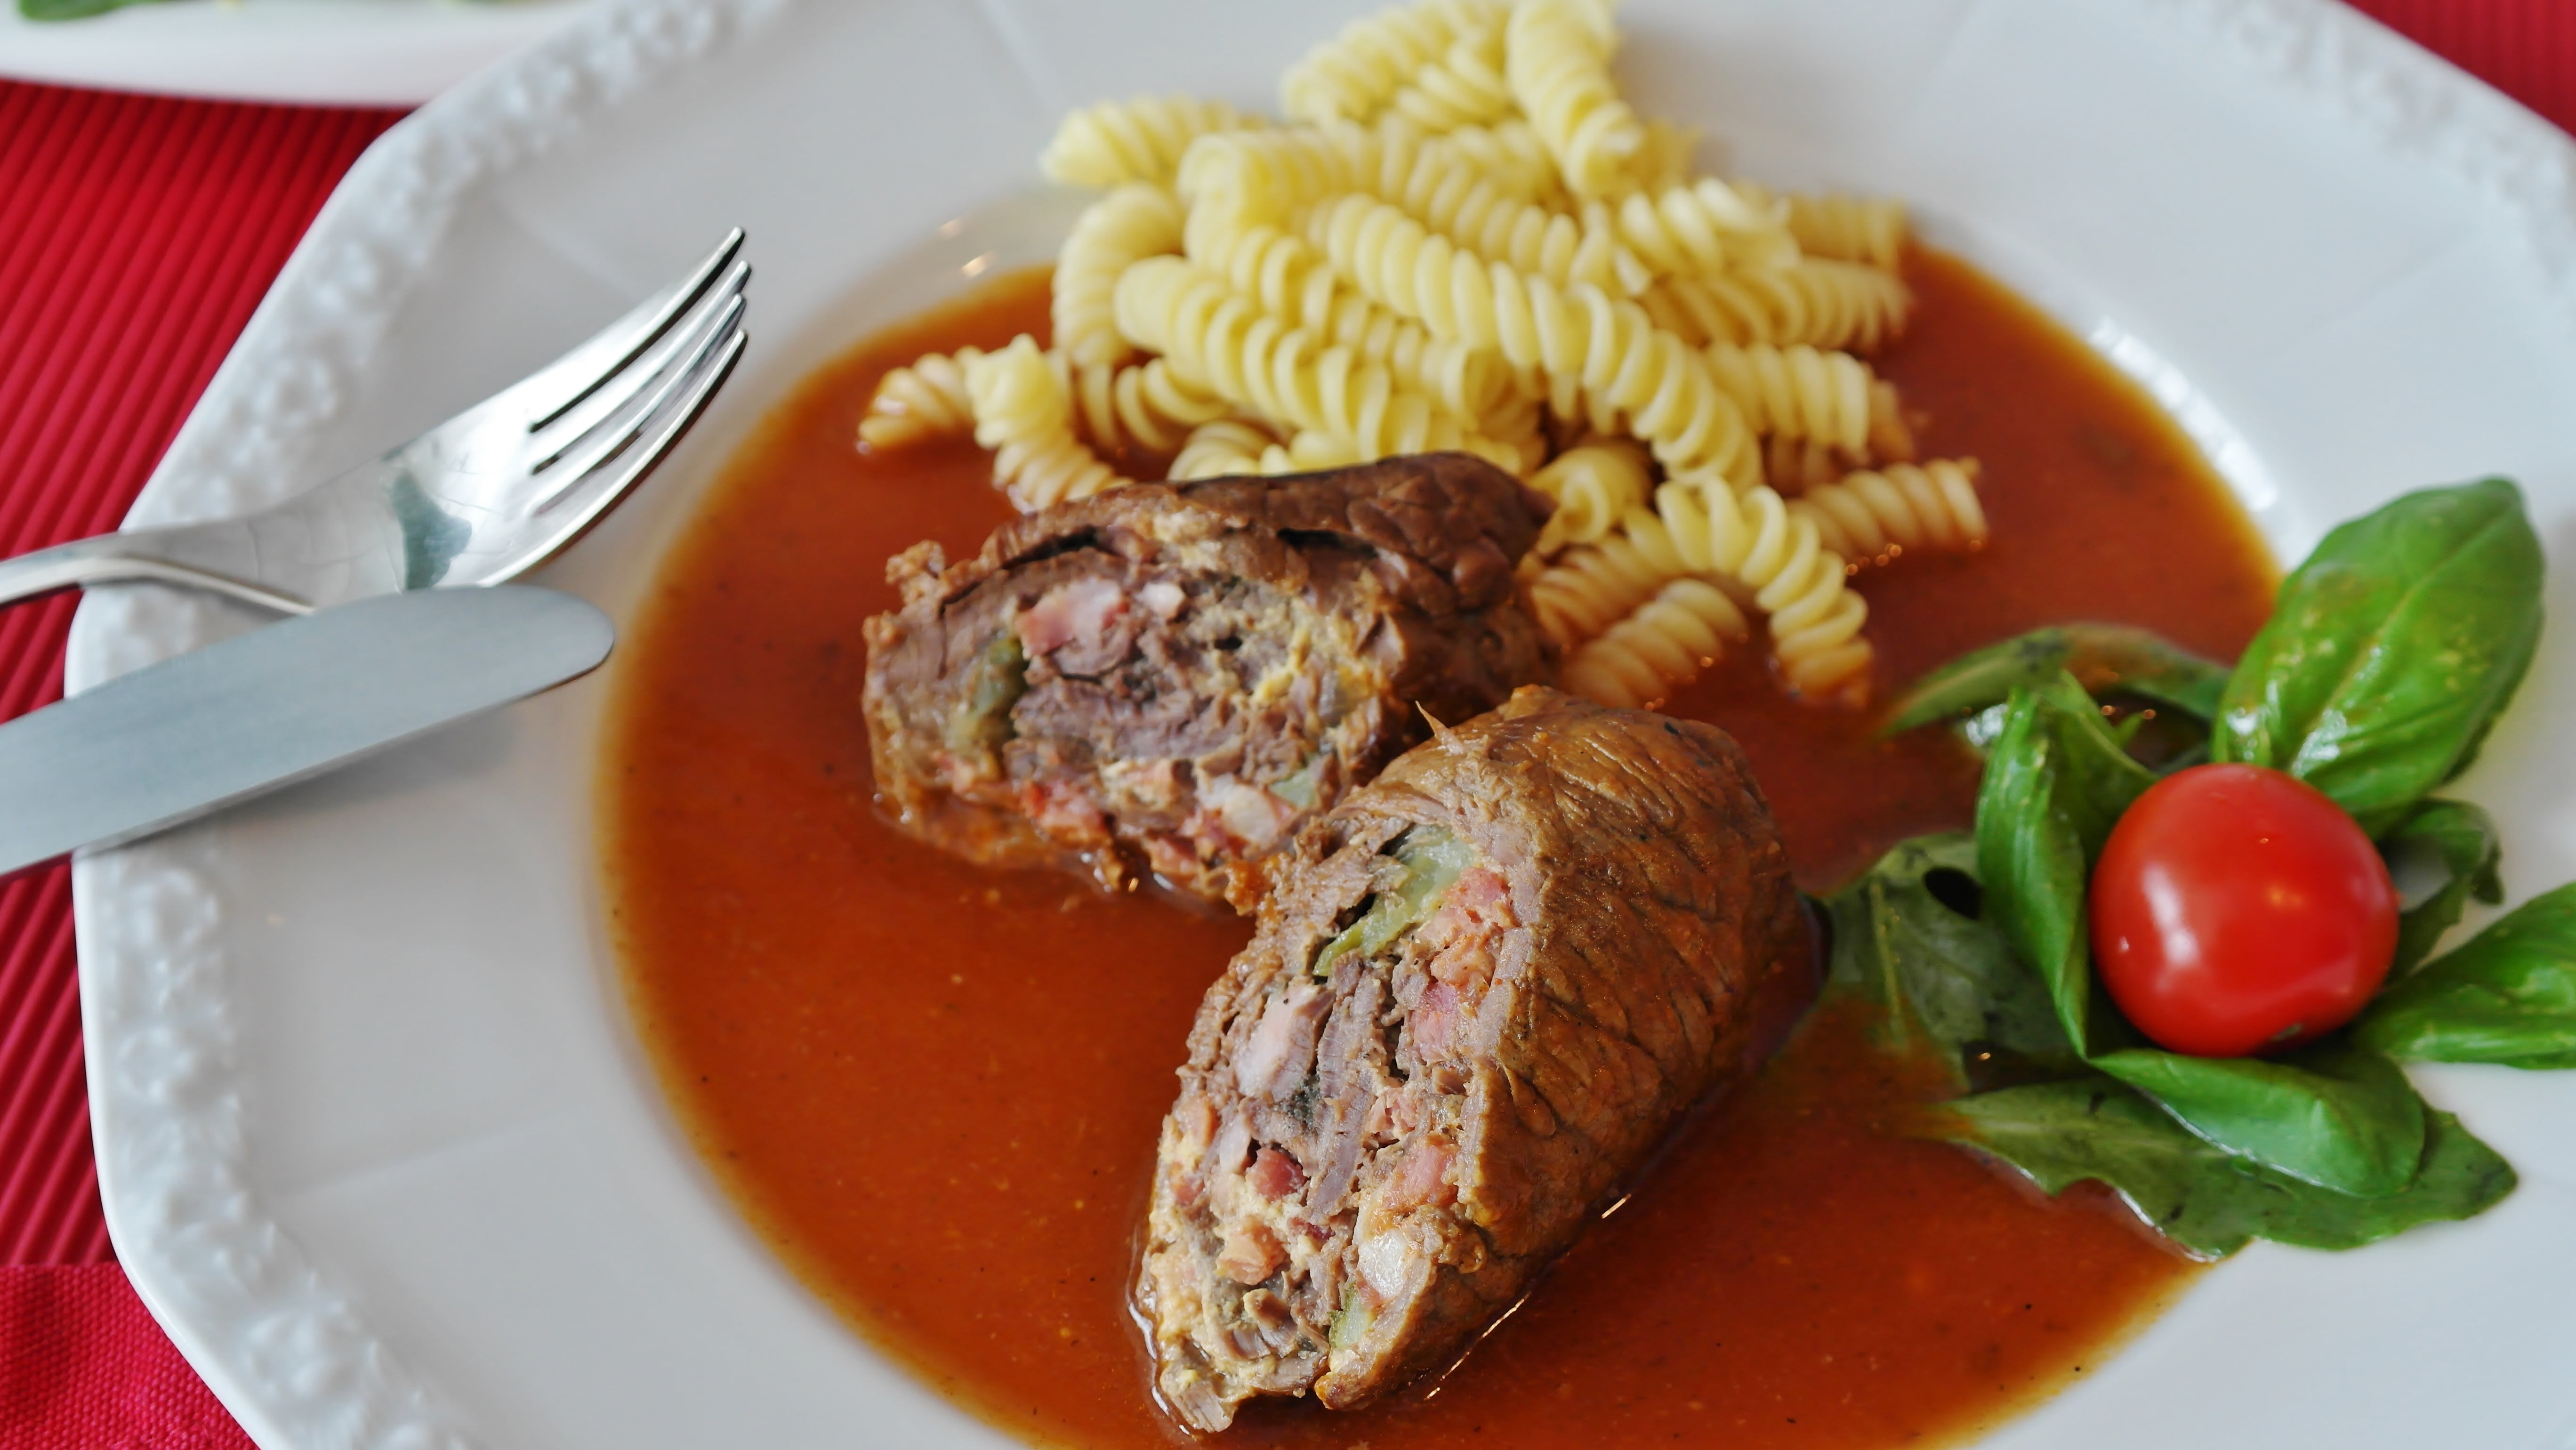 cooked meat, meatloaf, pasta, vegetables, sauce, food, food and drink